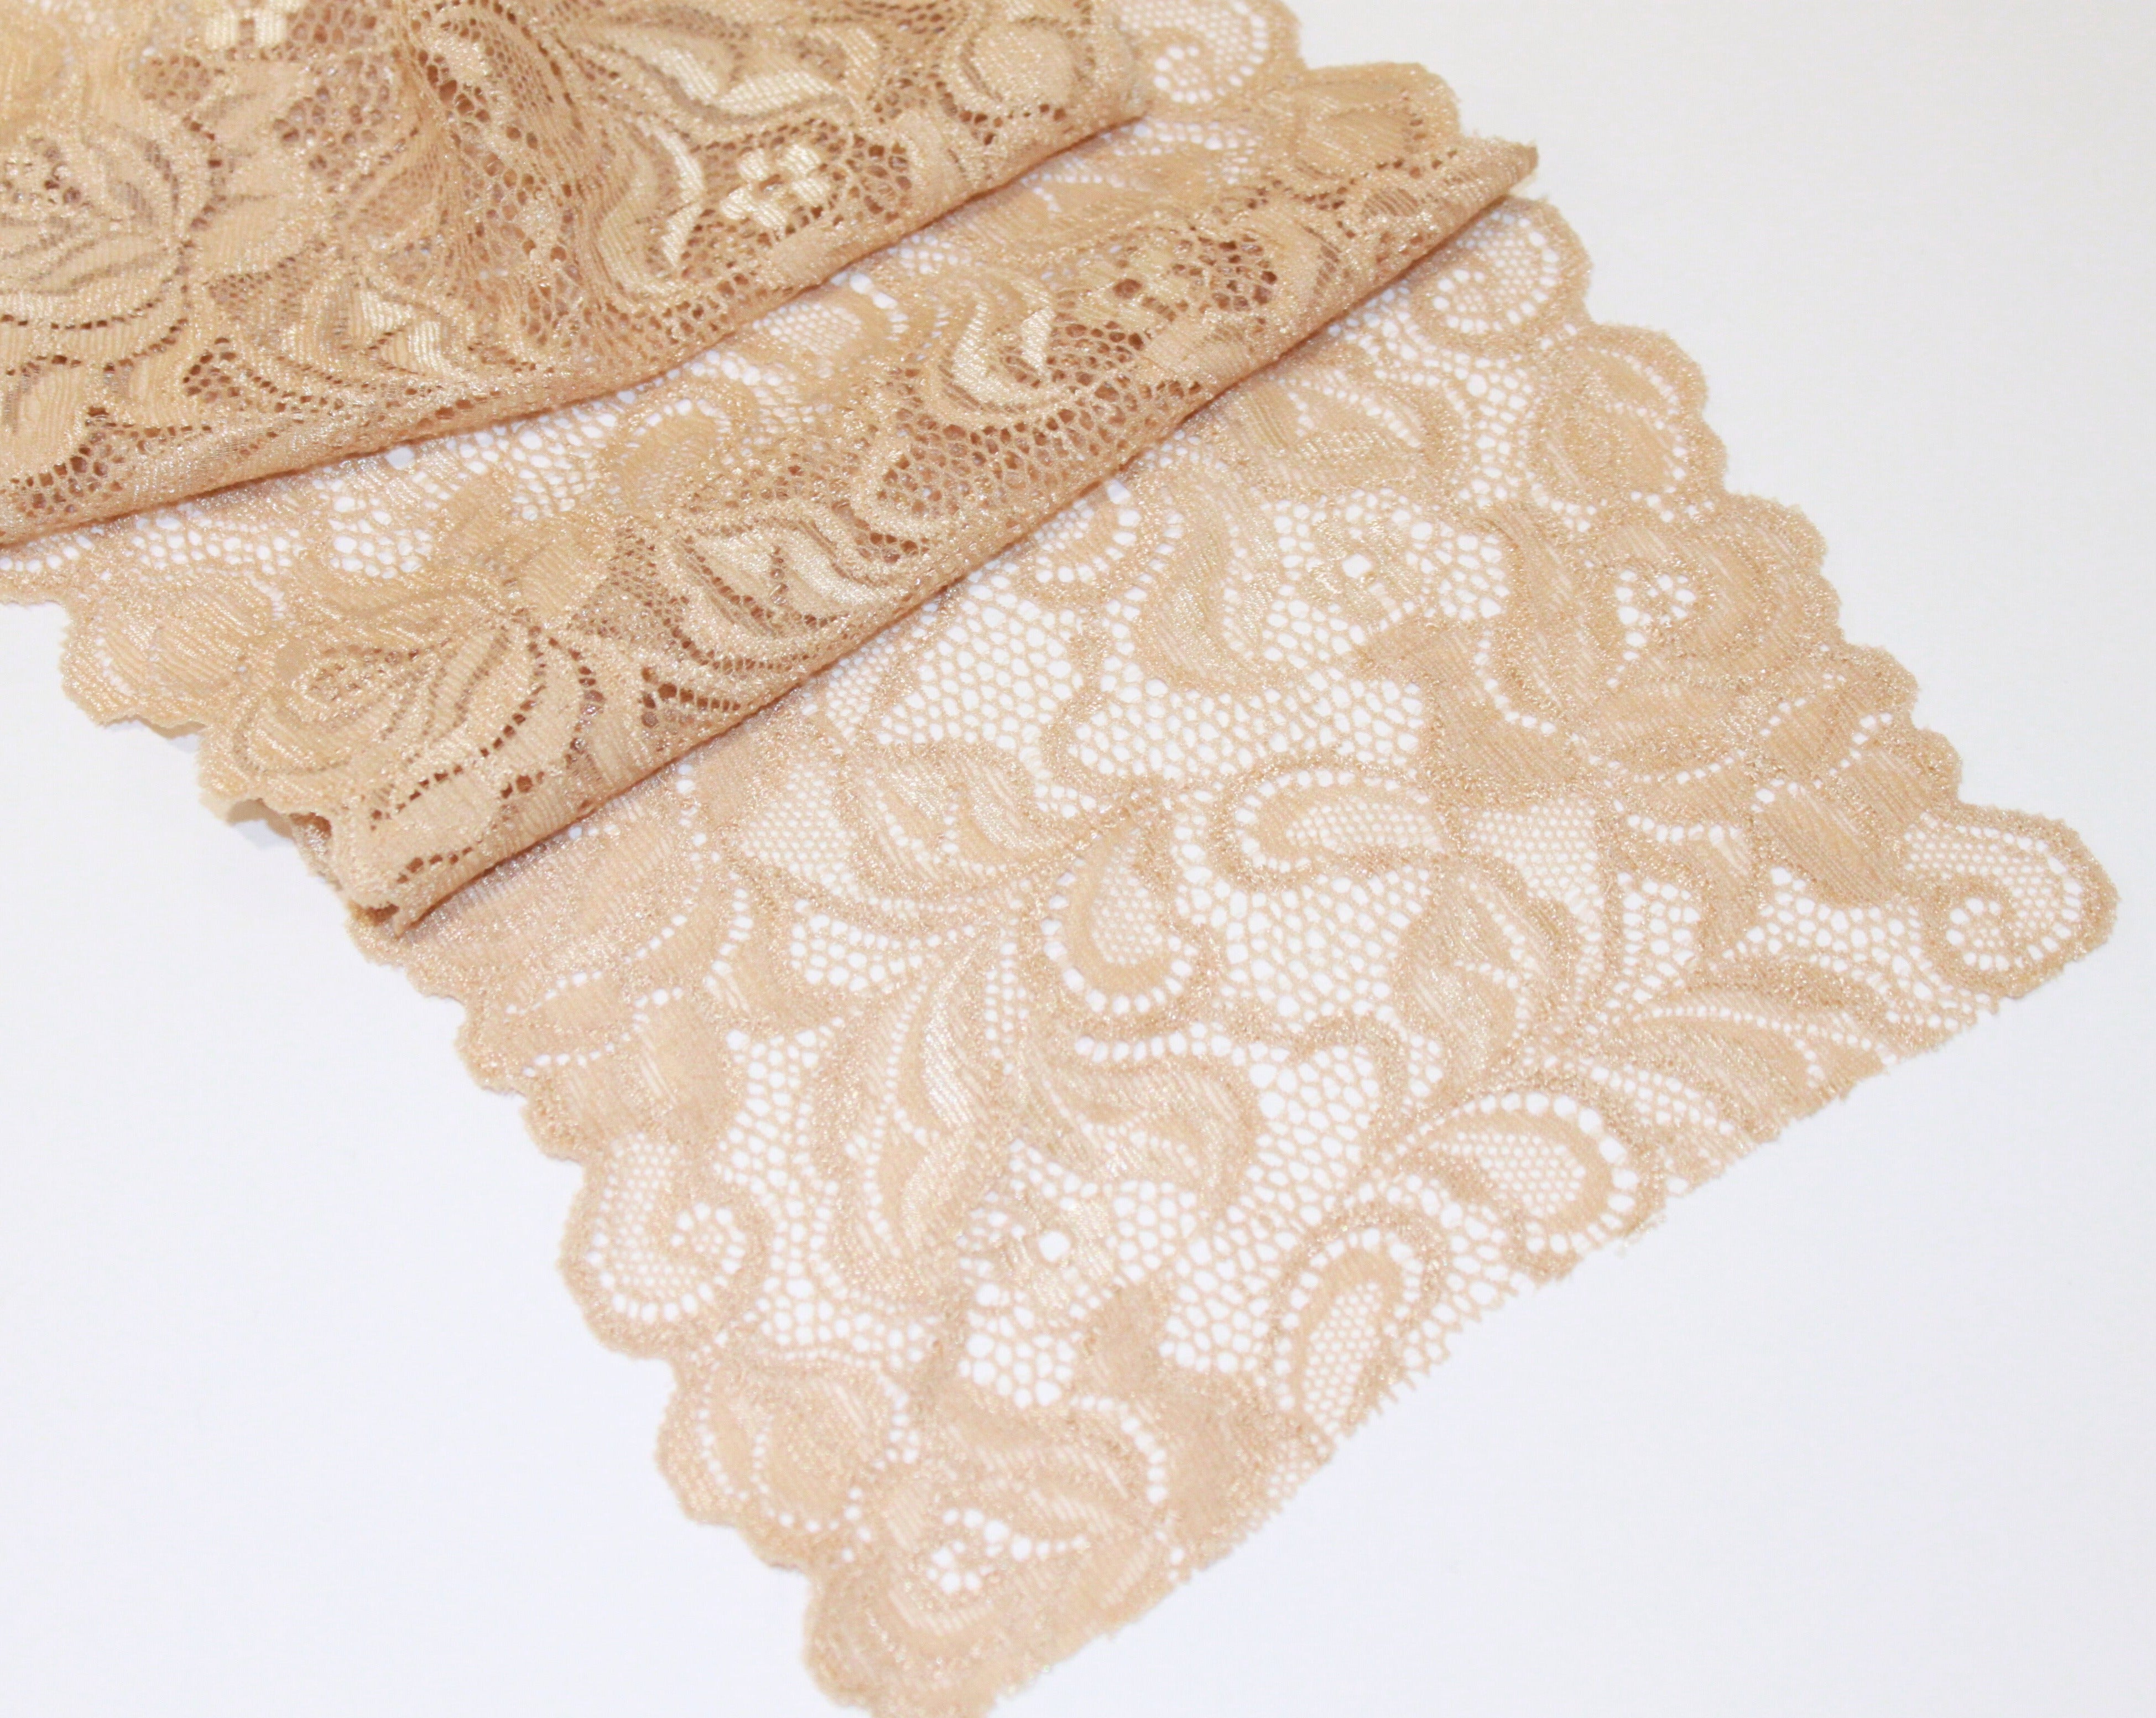 Fancy Stretch Nylon Spandex Scalloped Lace Trim for Lingerie